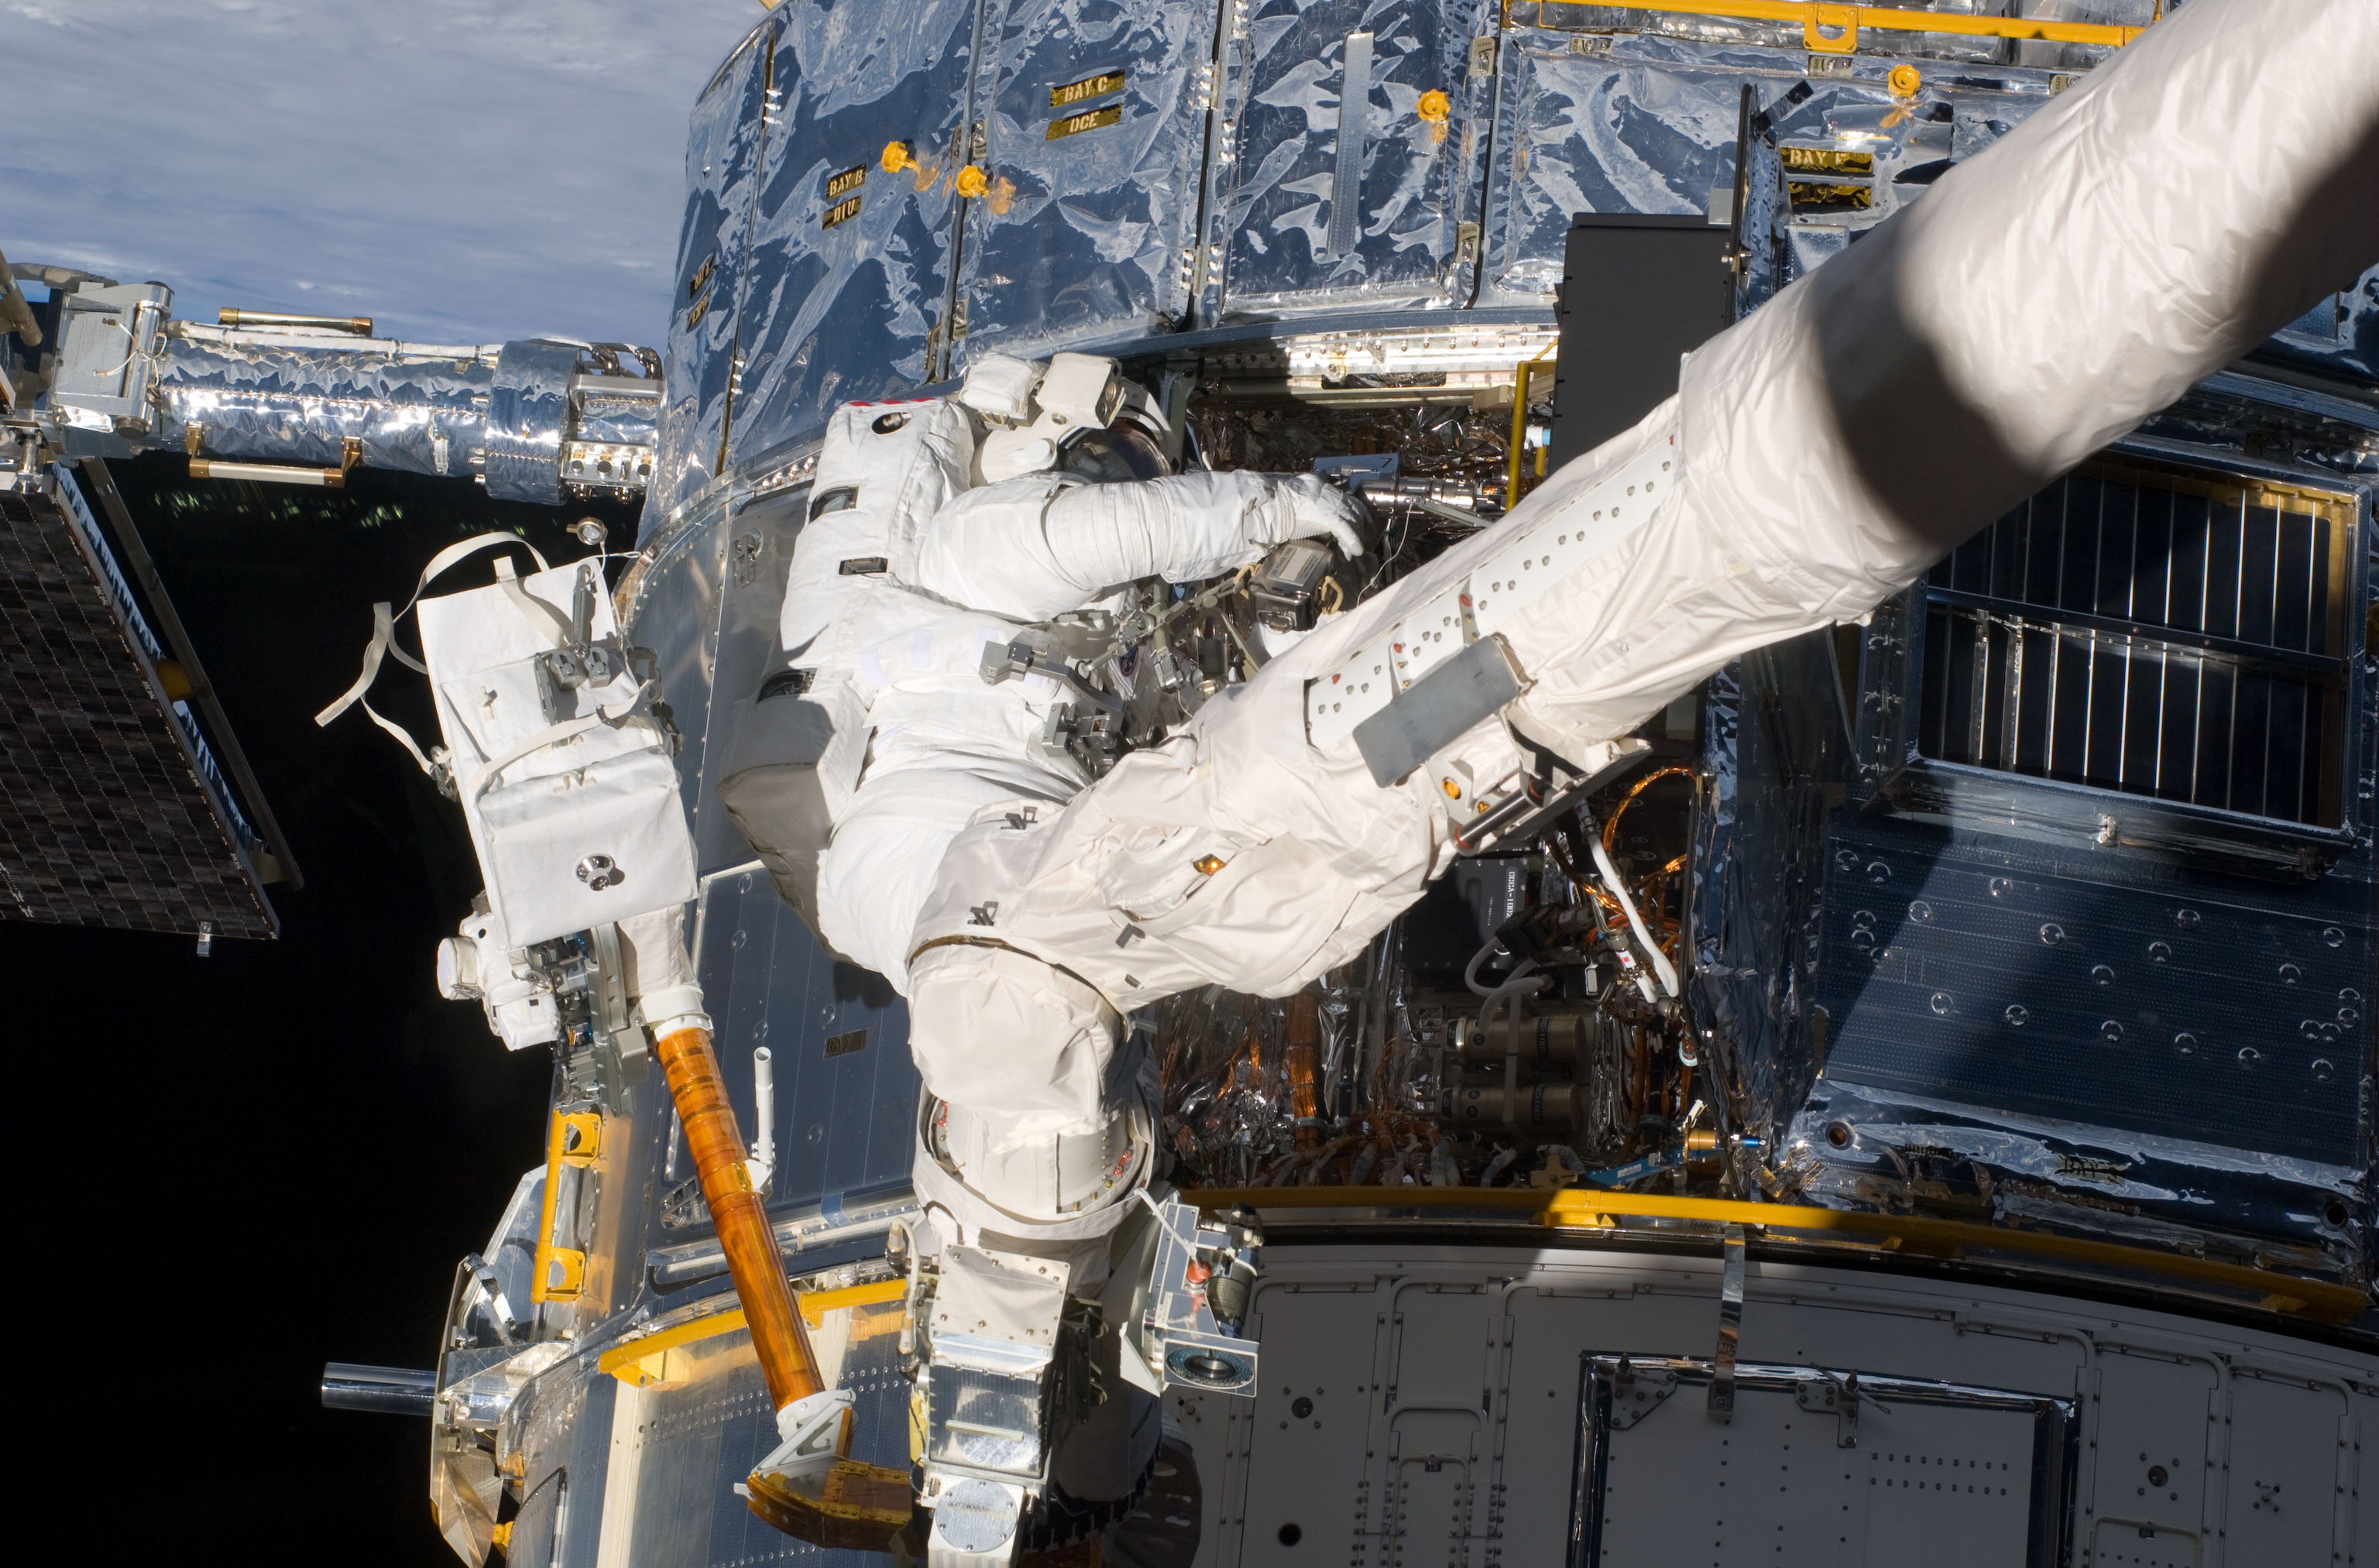 An astronaut is partially obscured by the bulk of the space shuttle's robotic arm as he works on the innards of the Hubble telescope.